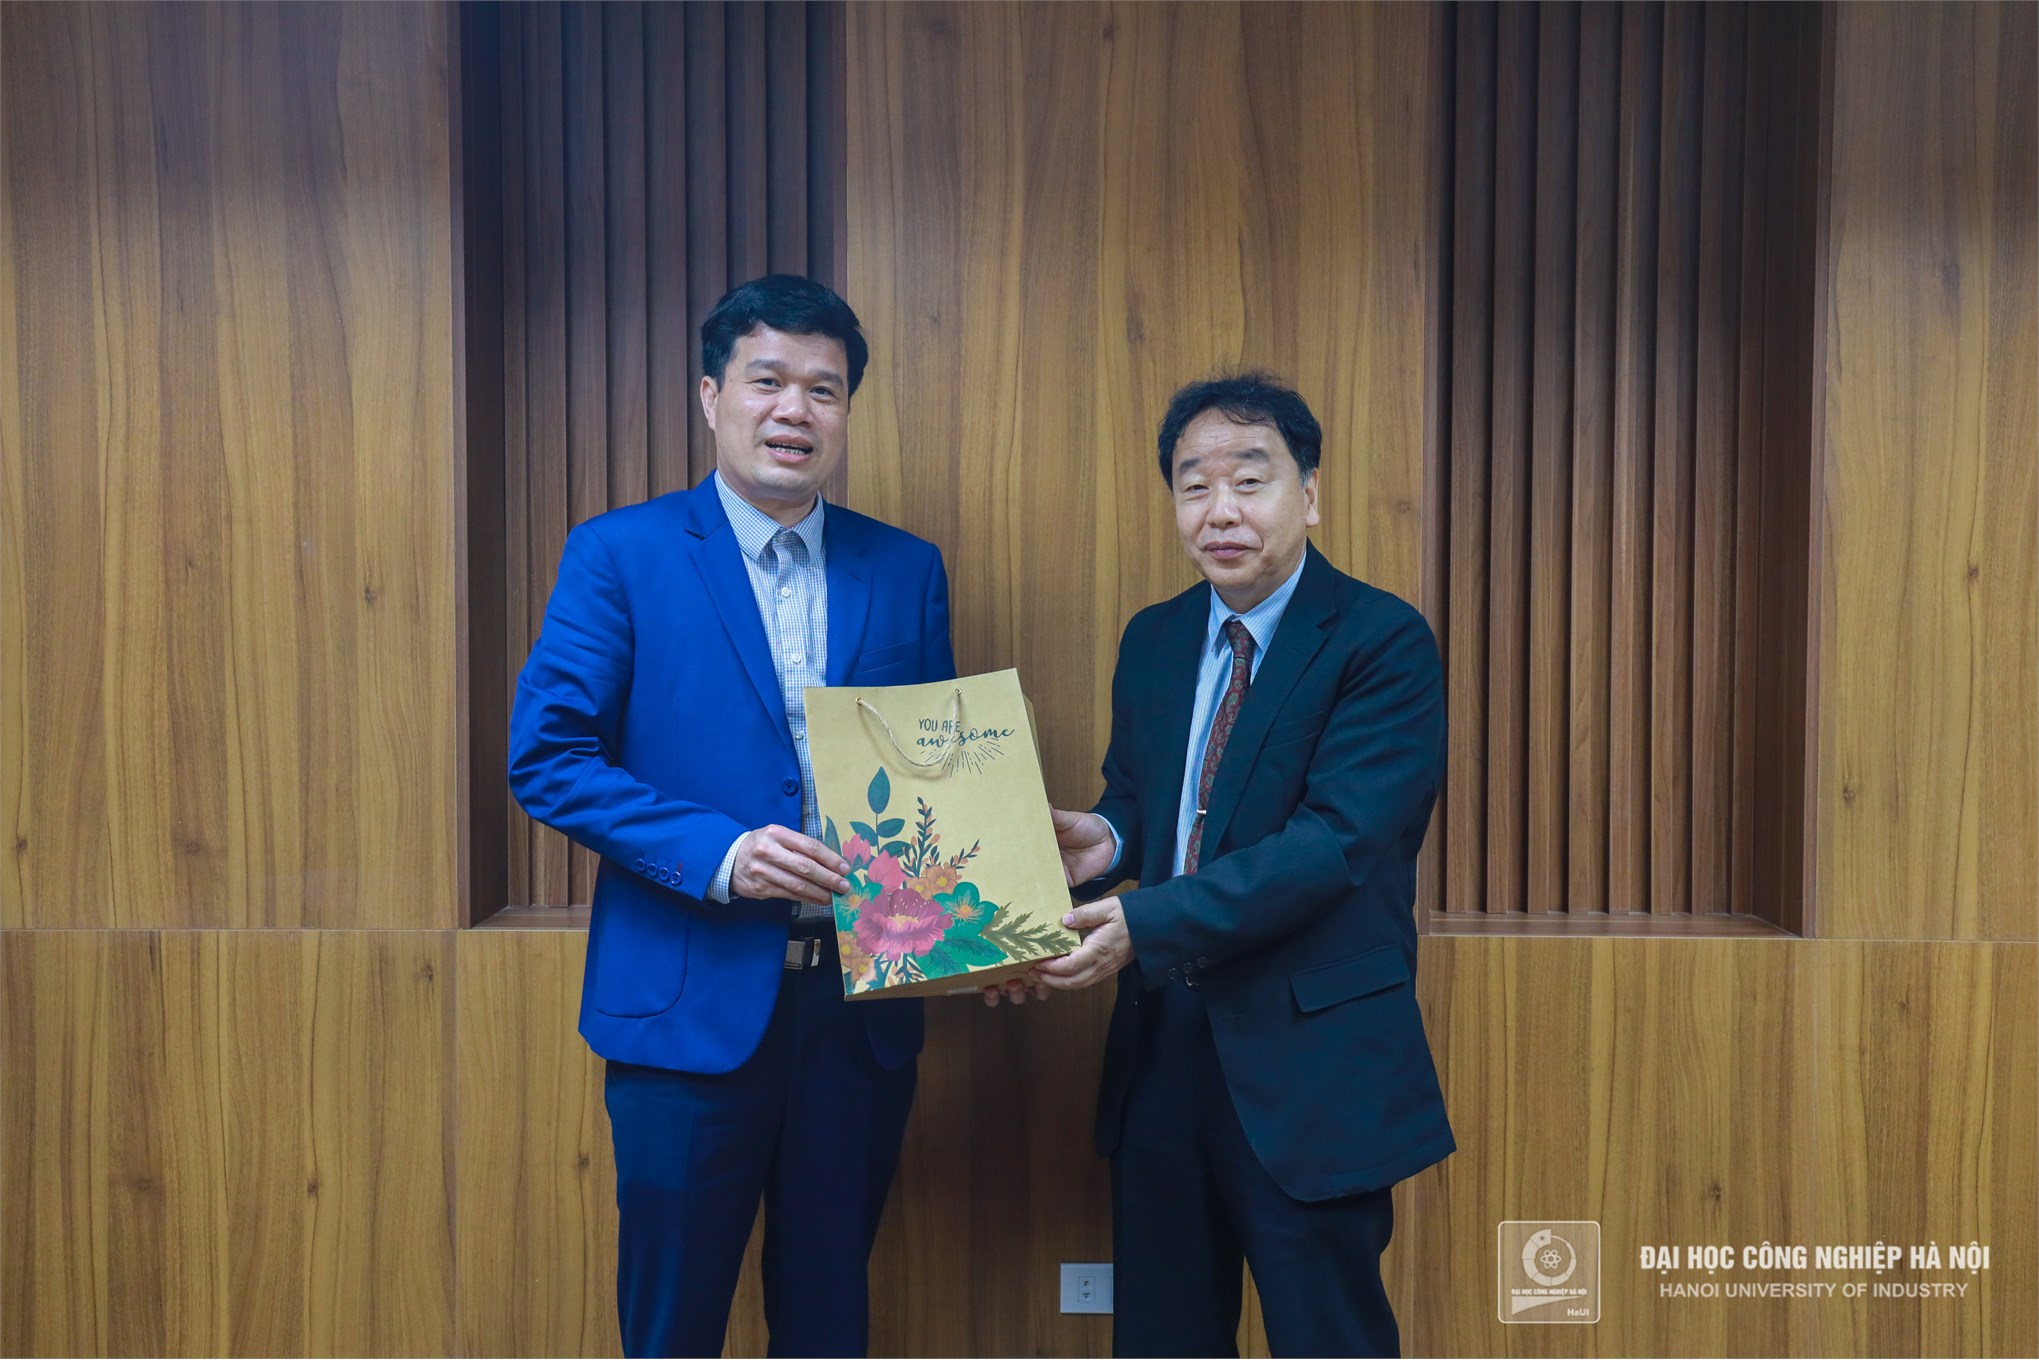 Hanoi University of Industry cooperates with Nissan Automotive Technology Vietnam in training high-quality human resources